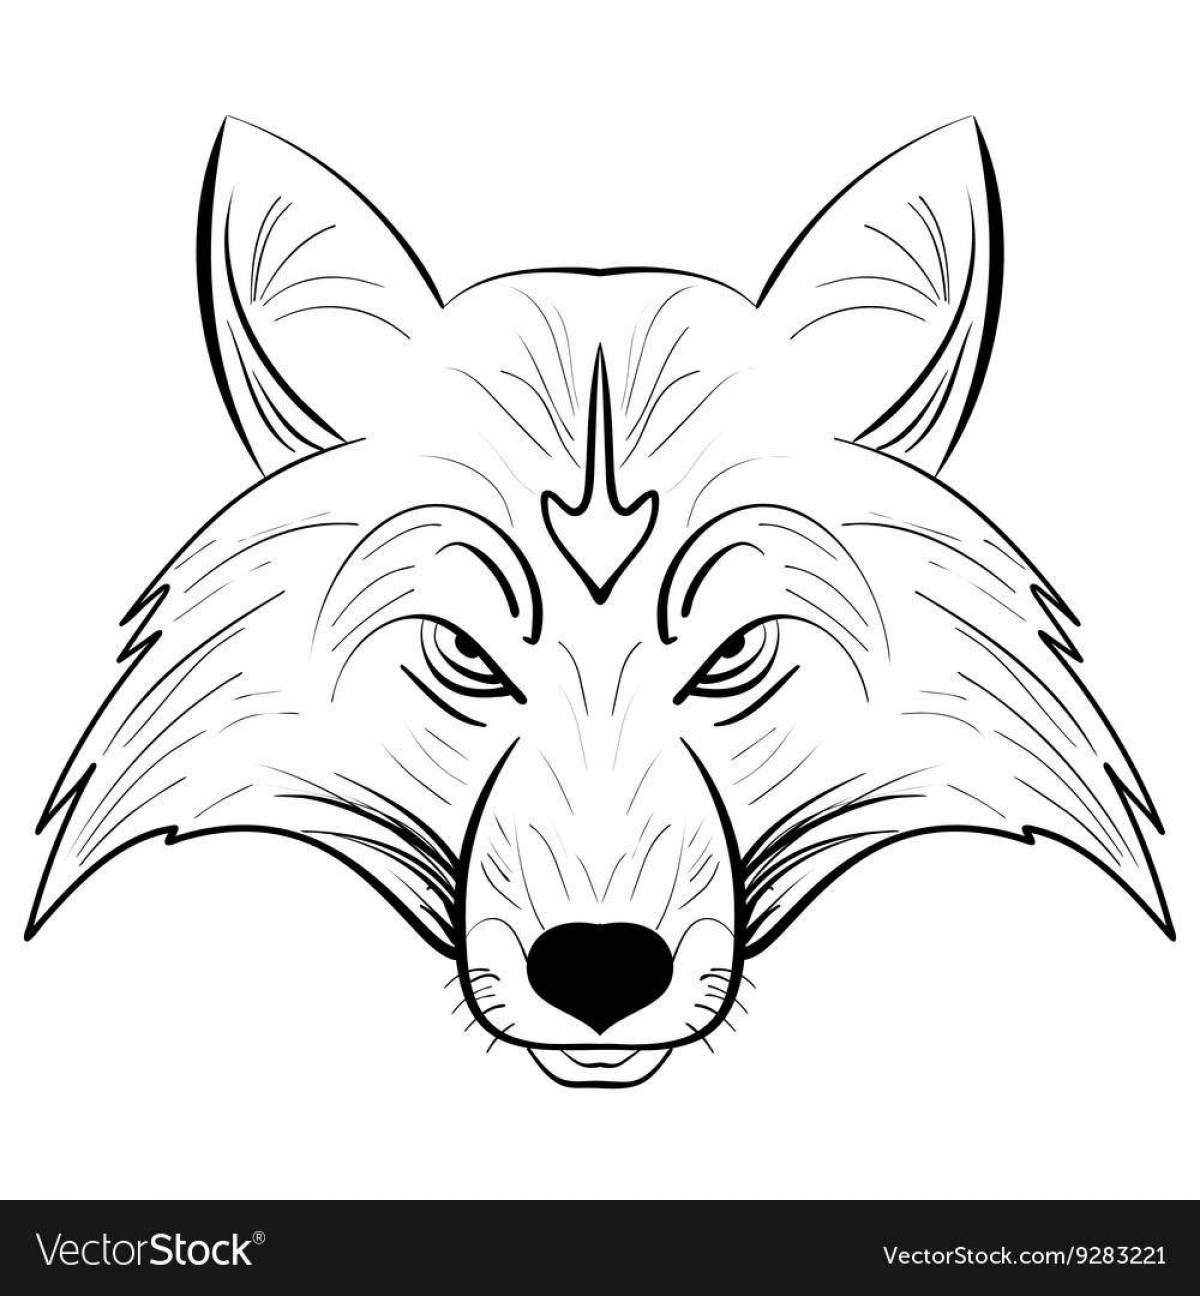 Attractive fox face coloring page